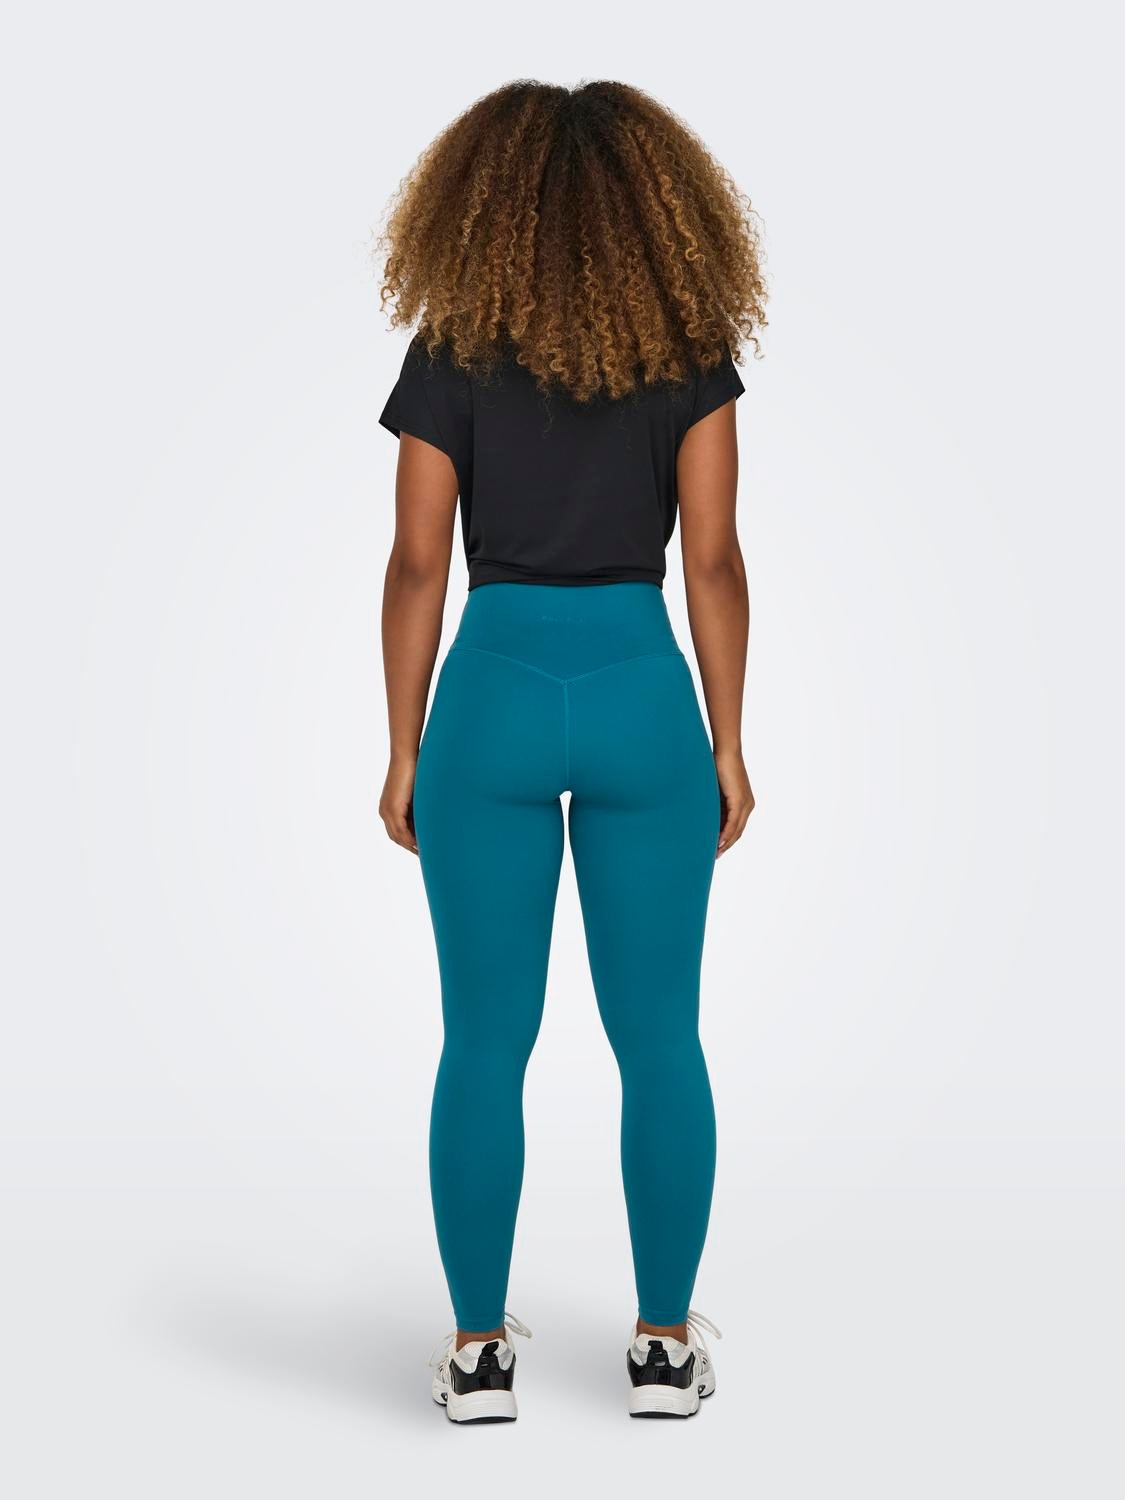 ONLY Tight Fit Super-high waist Leggings -Dragonfly - 15303178